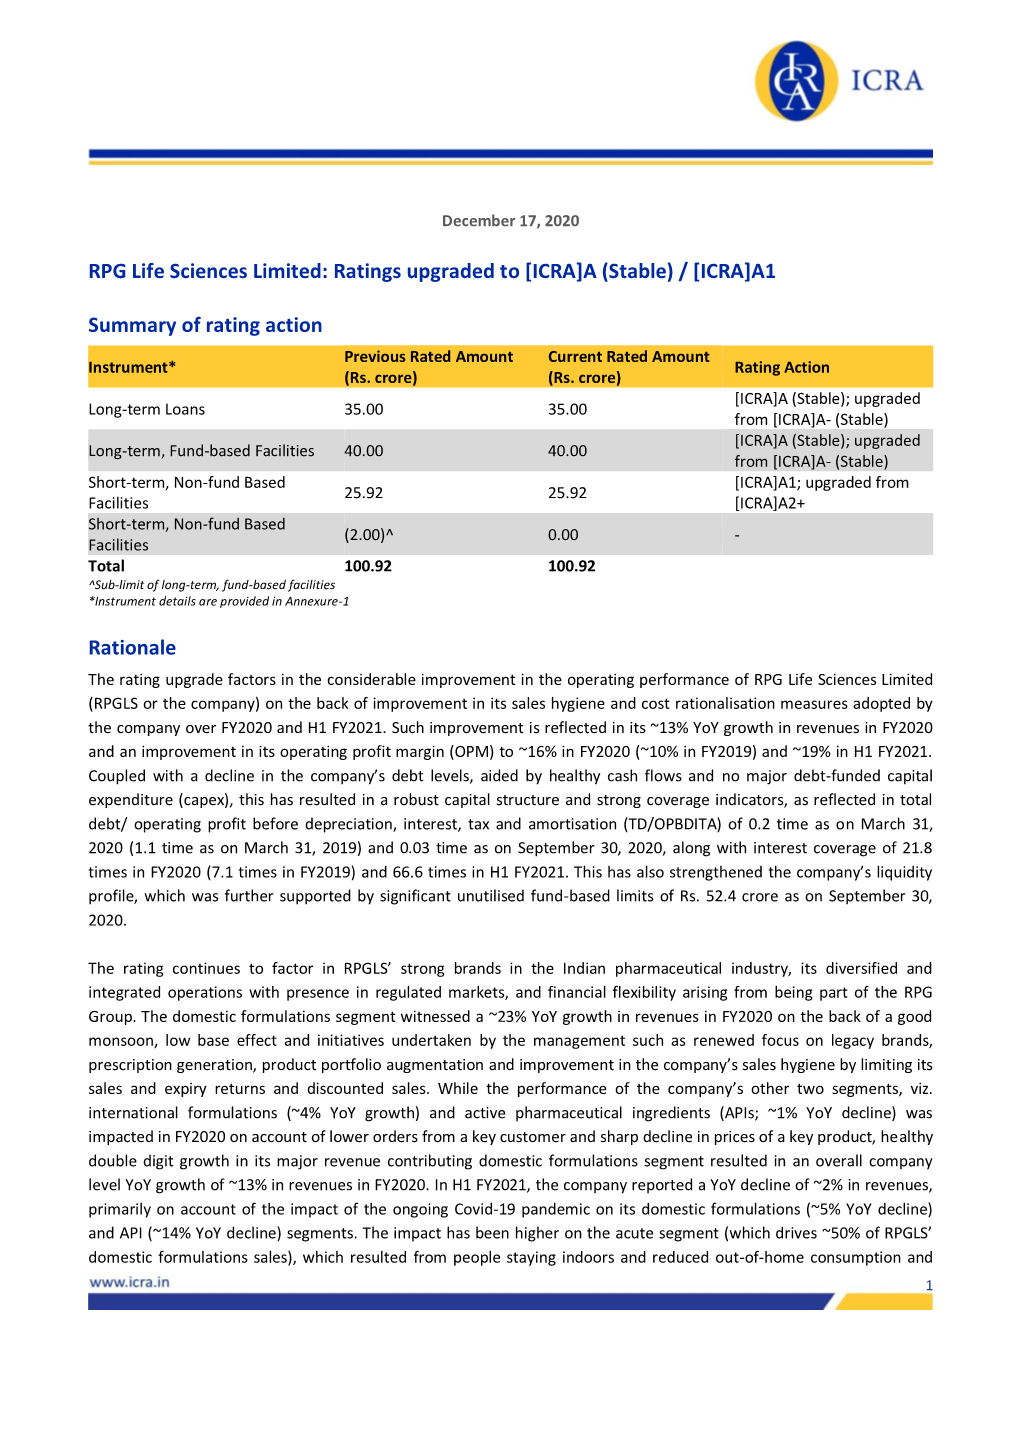 RPG Life Sciences Limited: Ratings Upgraded to [ICRA]A (Stable) / [ICRA]A1